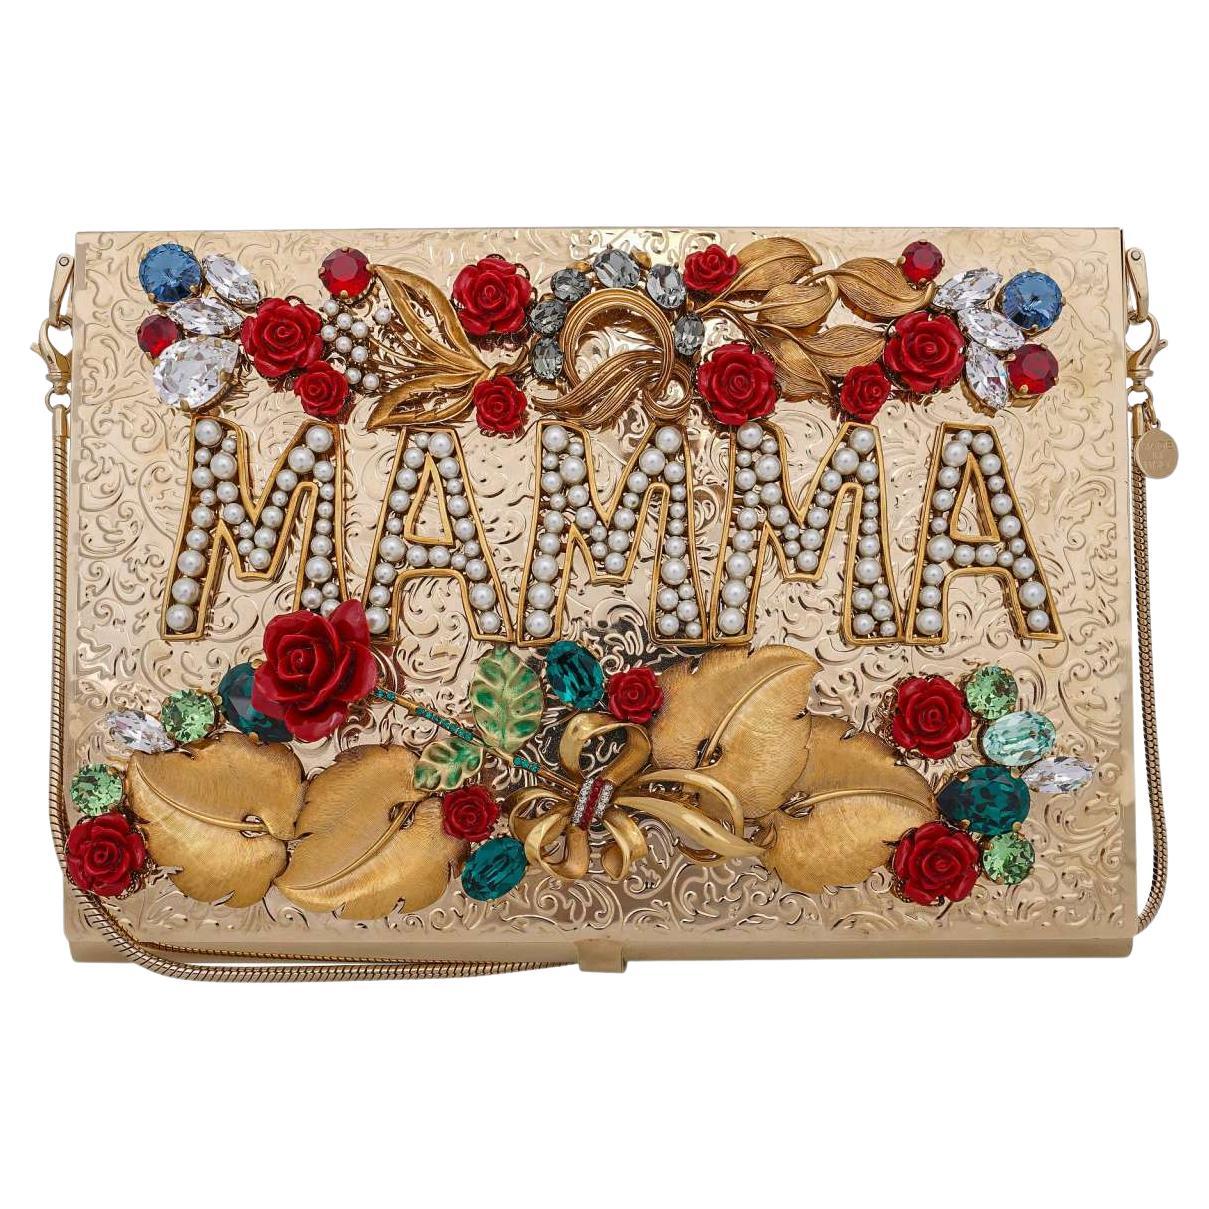 Dolce & Gabbana - Crystals and Roses Embellished Box Clutch Bag MAMMA Gold